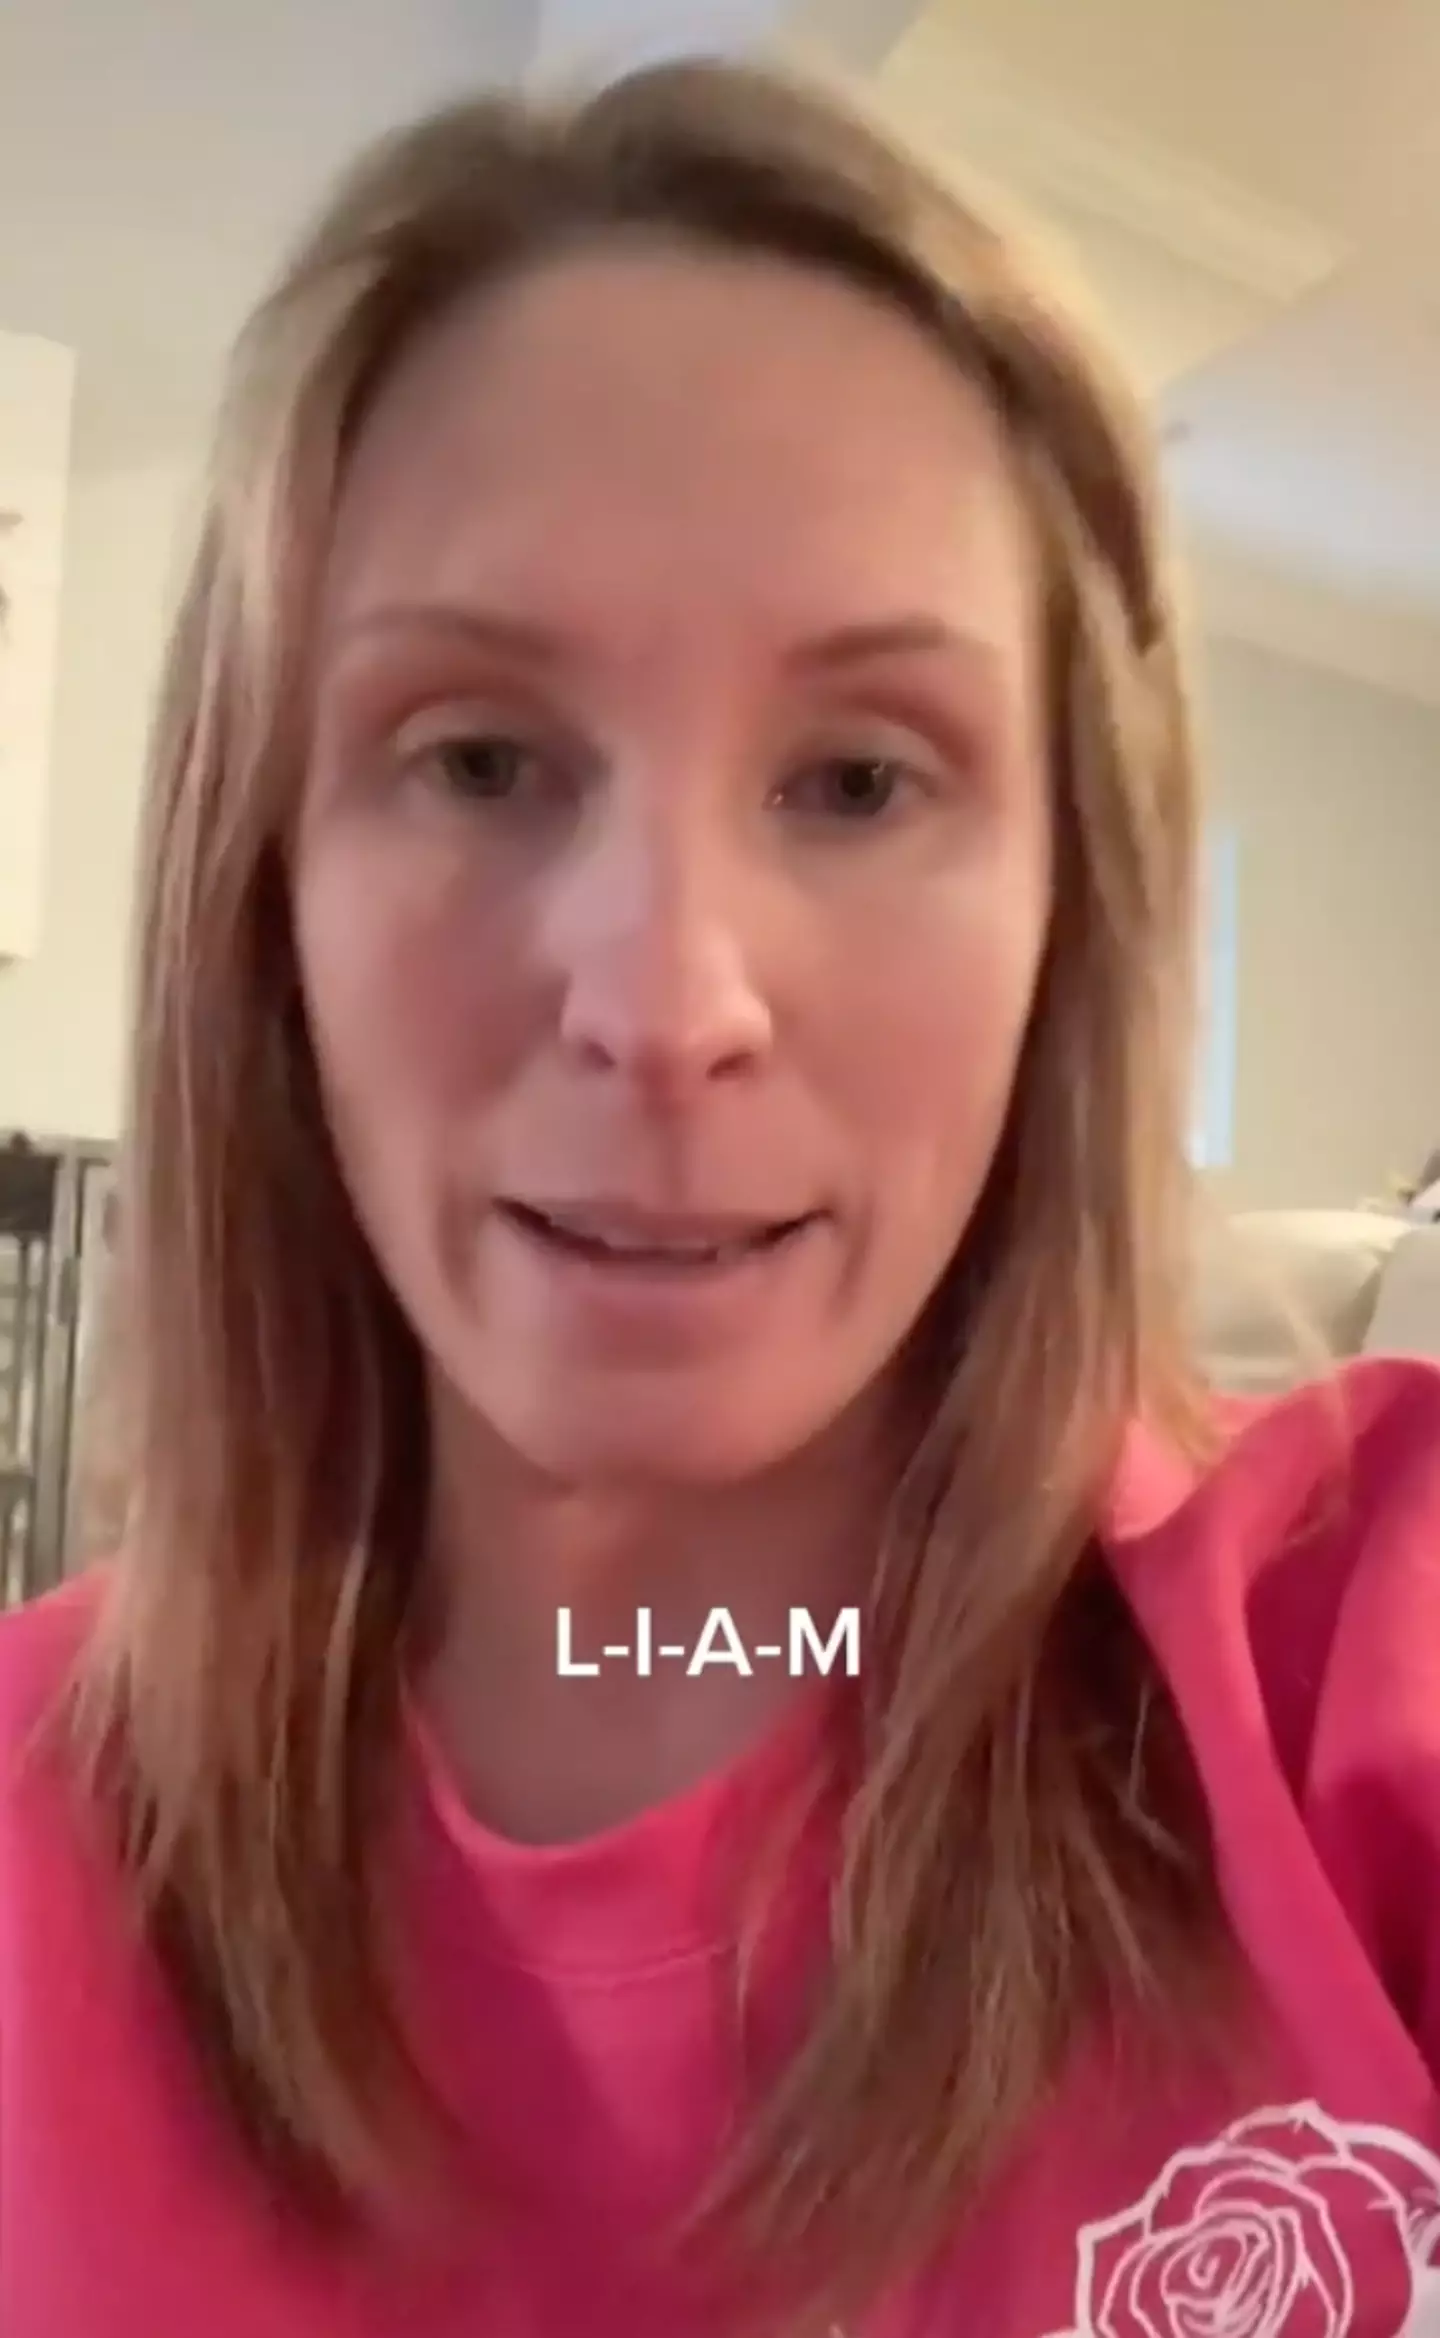 Lindsay was confident that she could pronounce the name Liam.